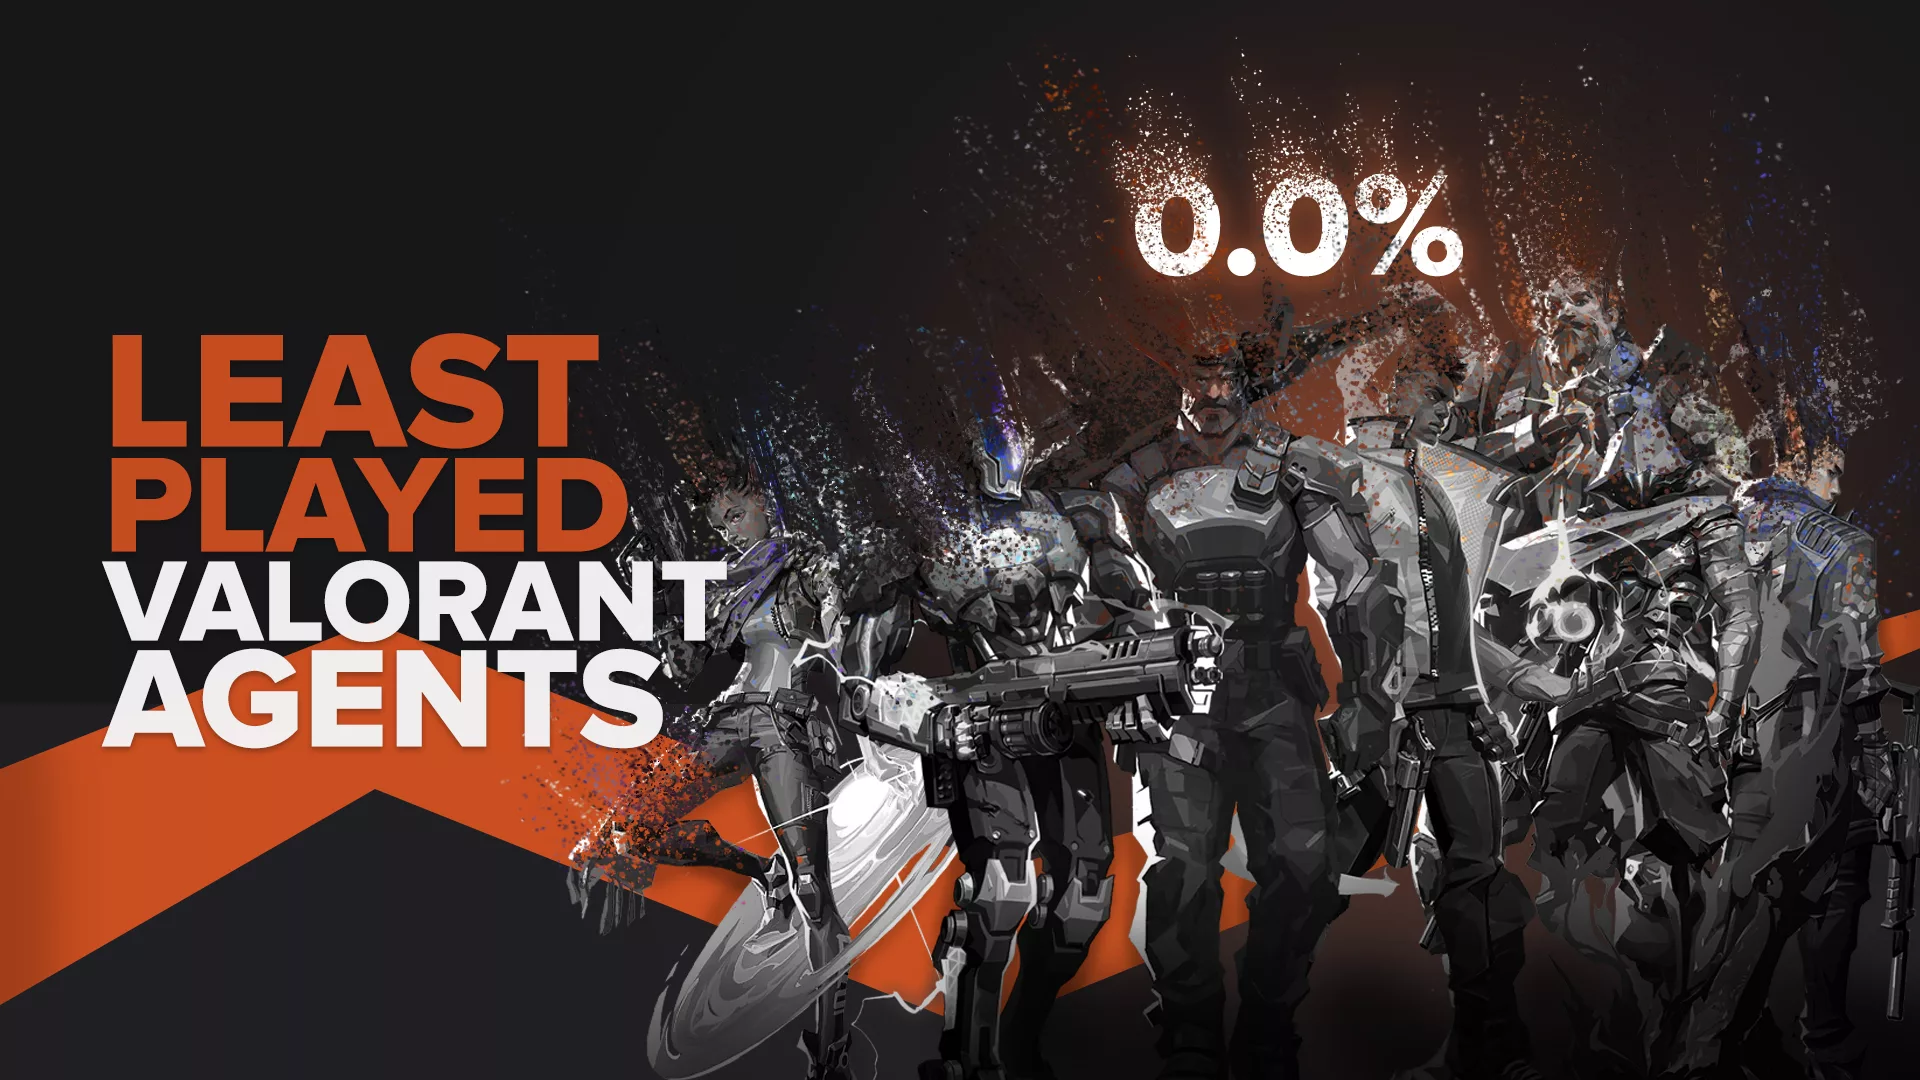 Least Played Valorant Agents